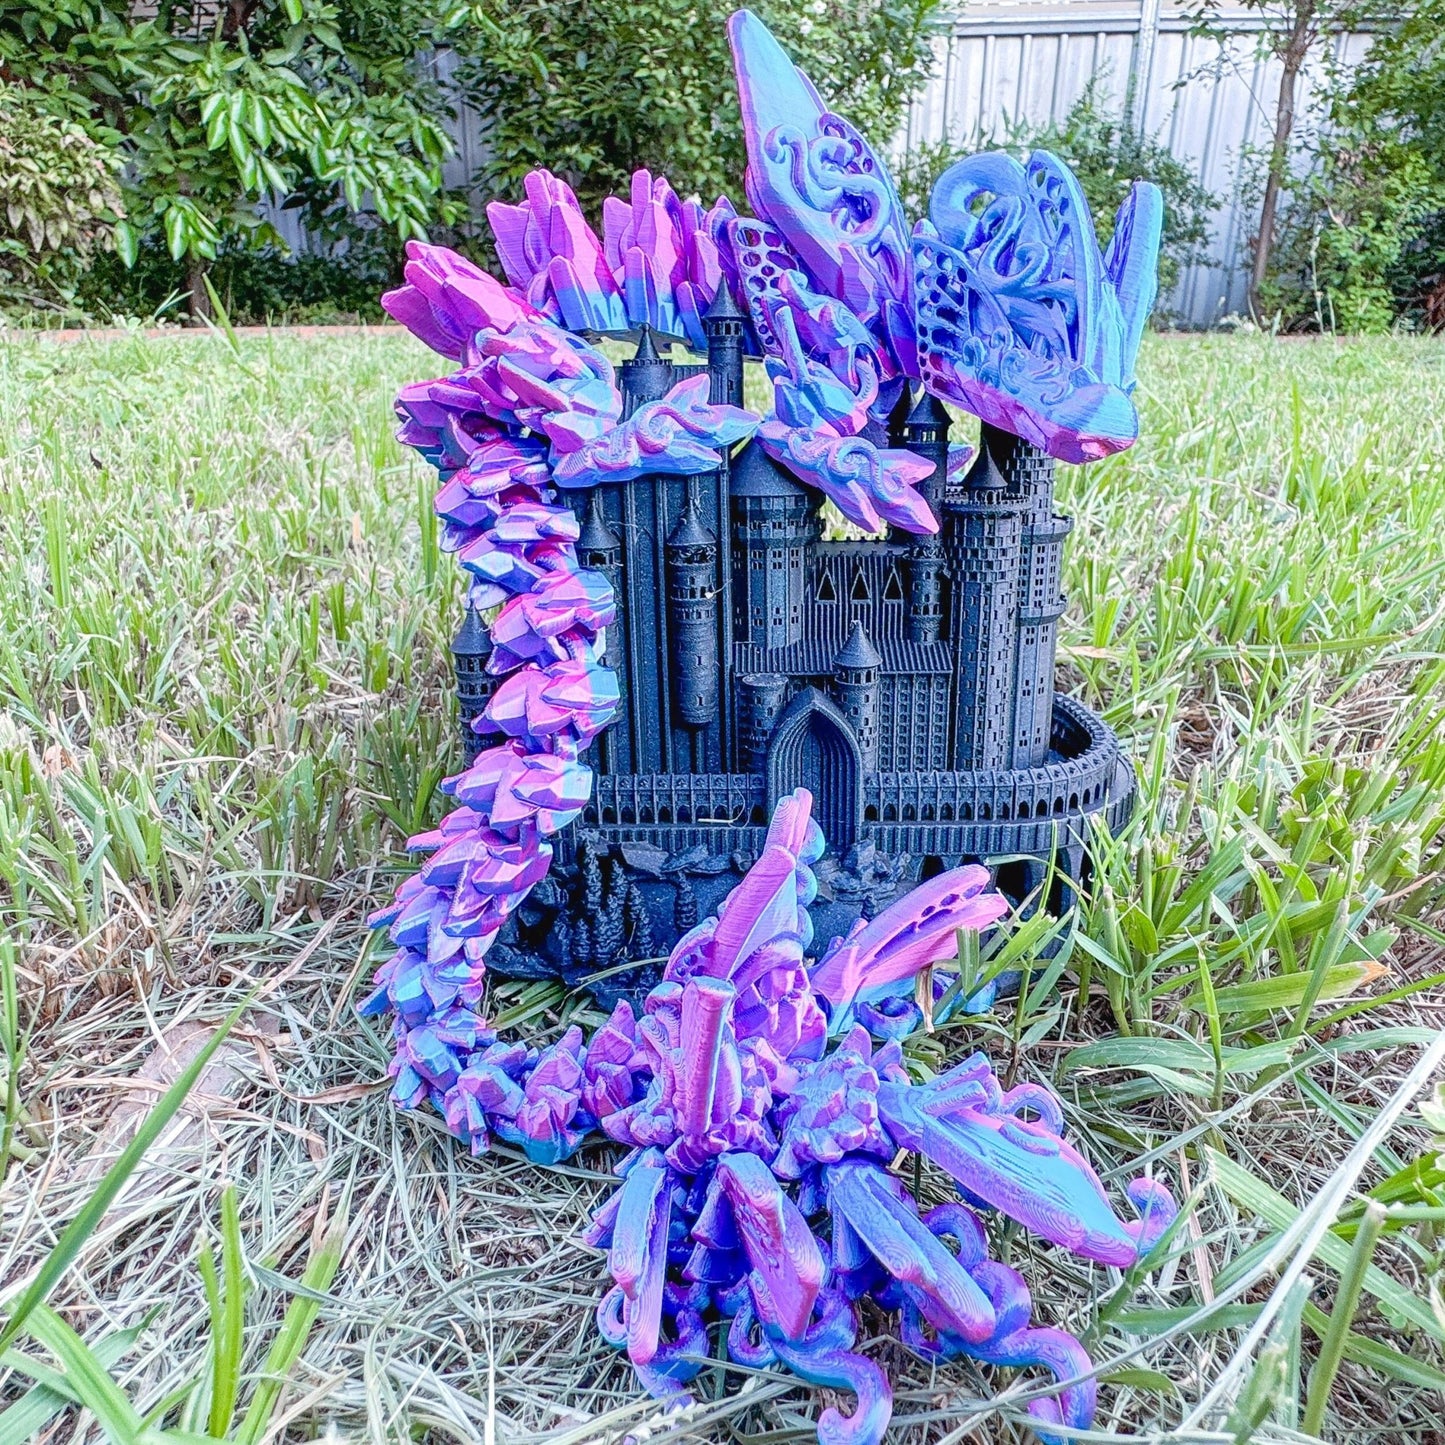 Articulated Butterfly Dragon | Fantasy Dragon Model | 3d Printed Dragon | Desk Fidget Toy - Fiction and Flames